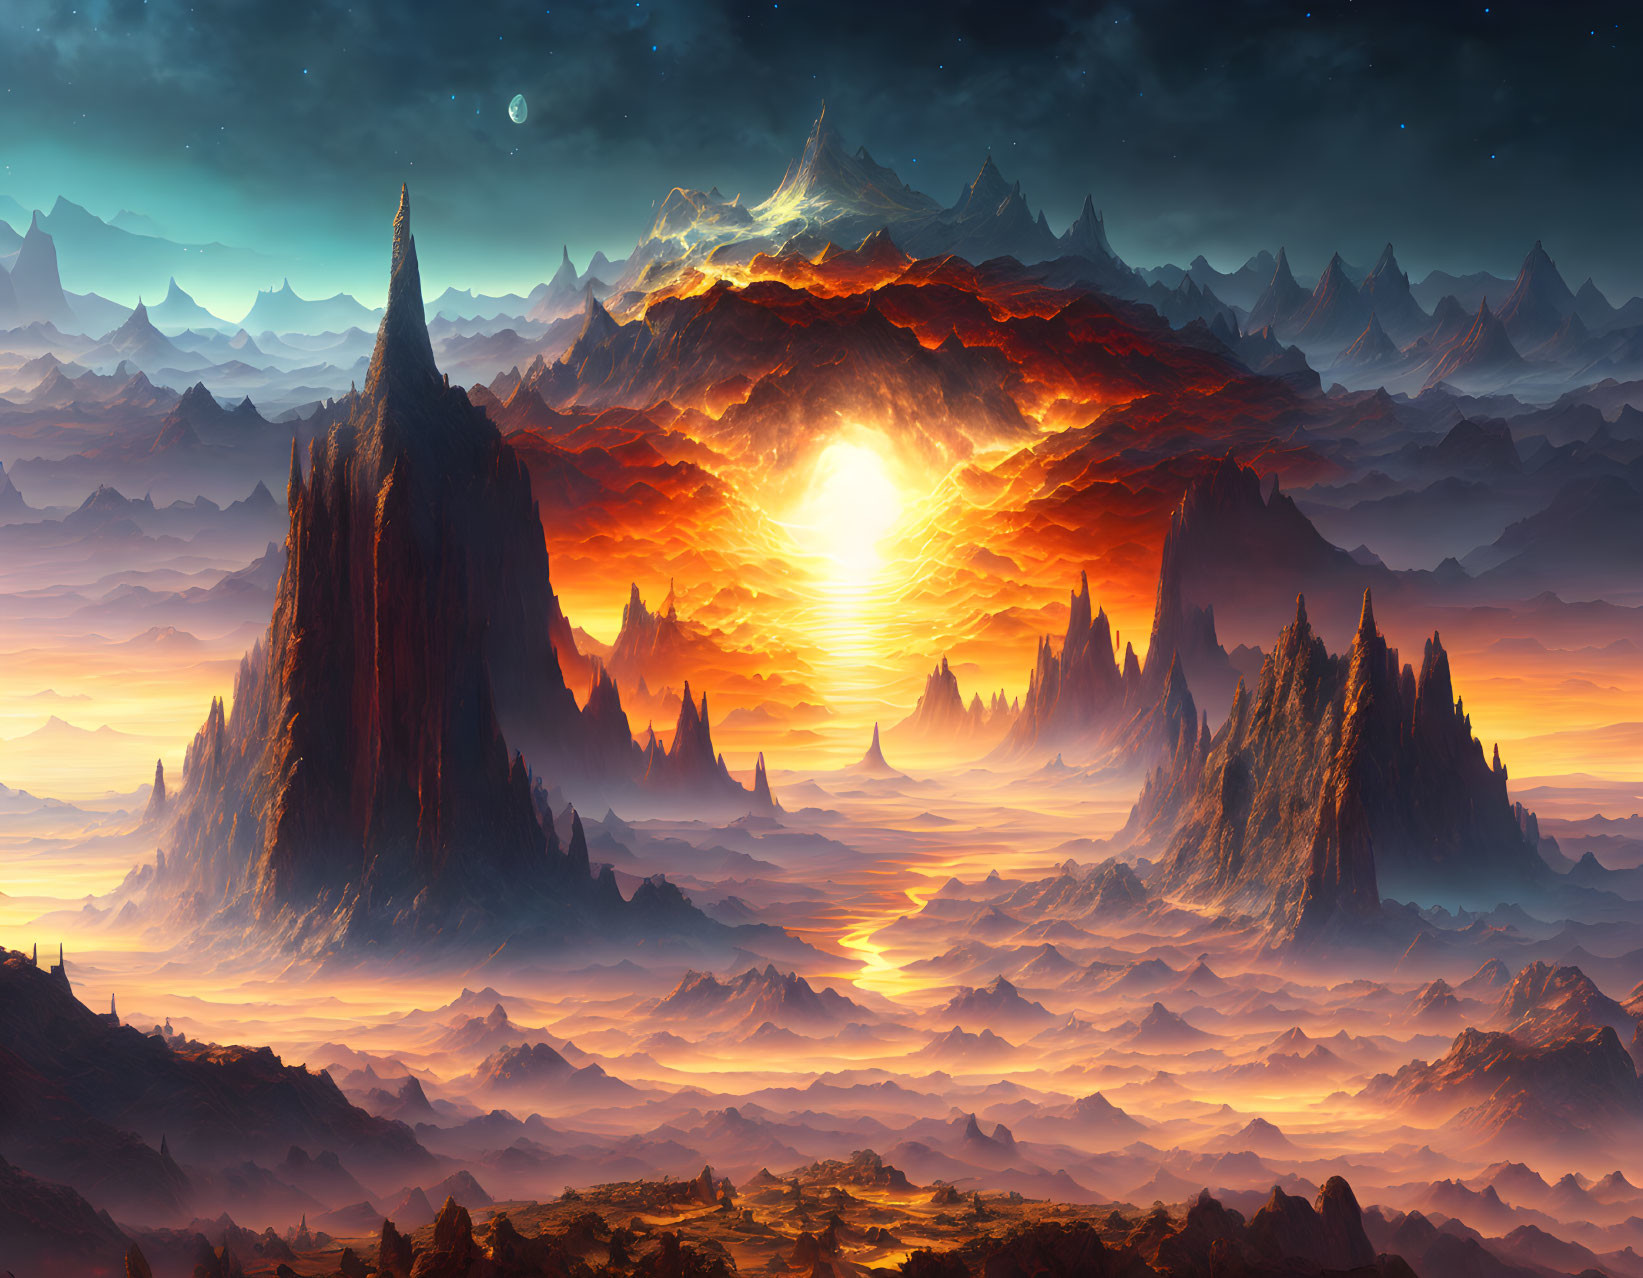 Fantastical sunset landscape with rocky spires and bright sun